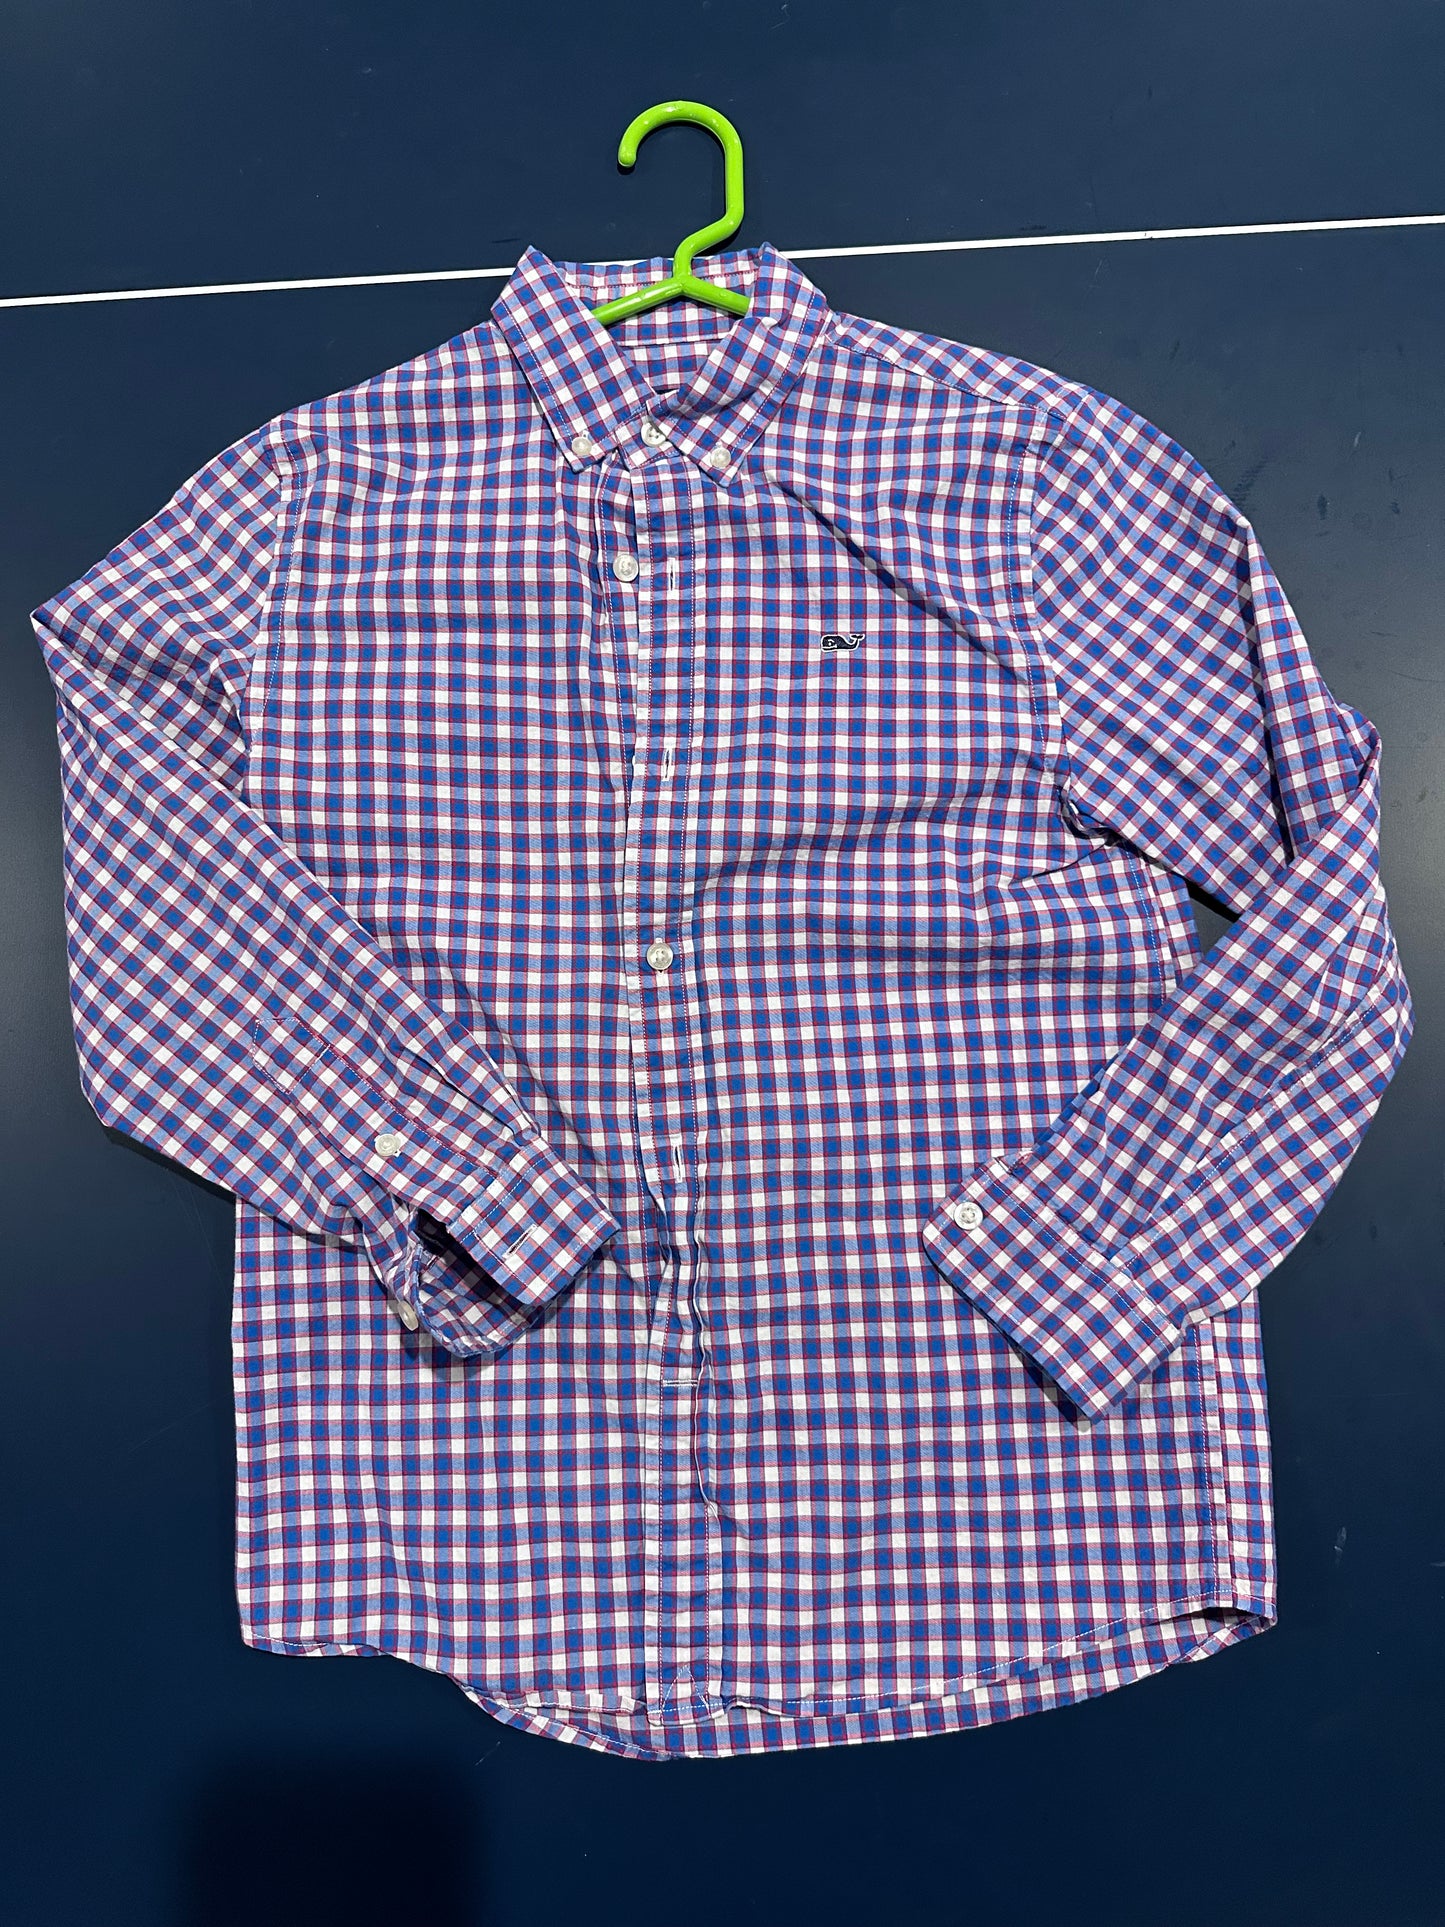 Vineyard Vines Boys Size Small 8-10 Gingham Button Down Shirt cotton, perfect condition